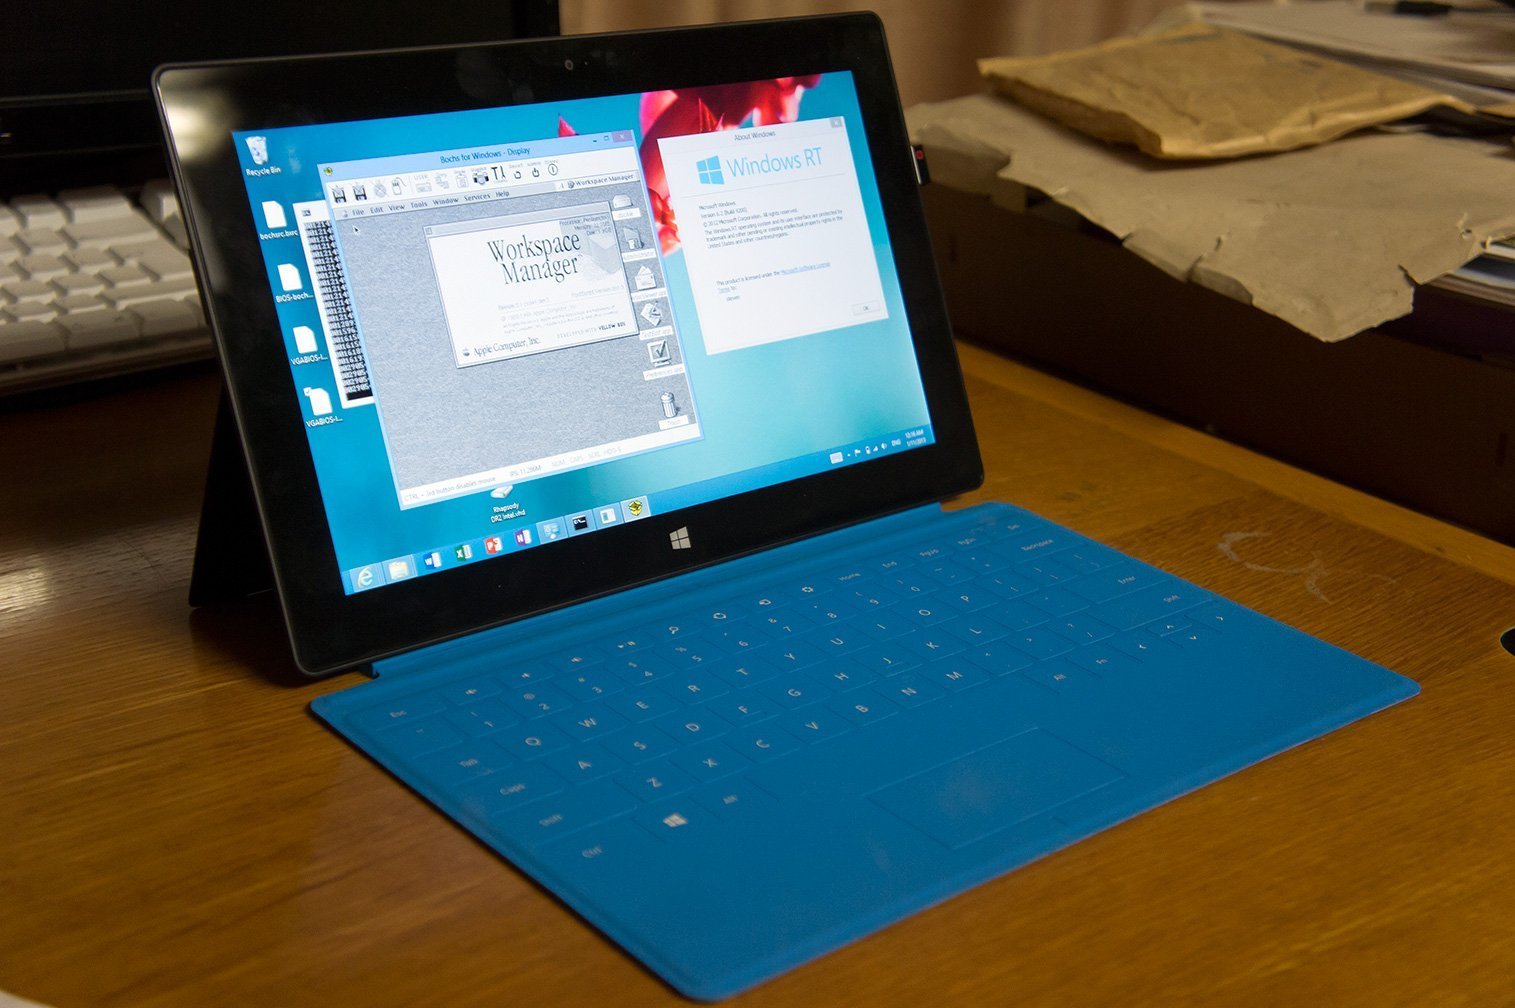 microsofts surface rt tablets wont be upgraded to windows 10 02